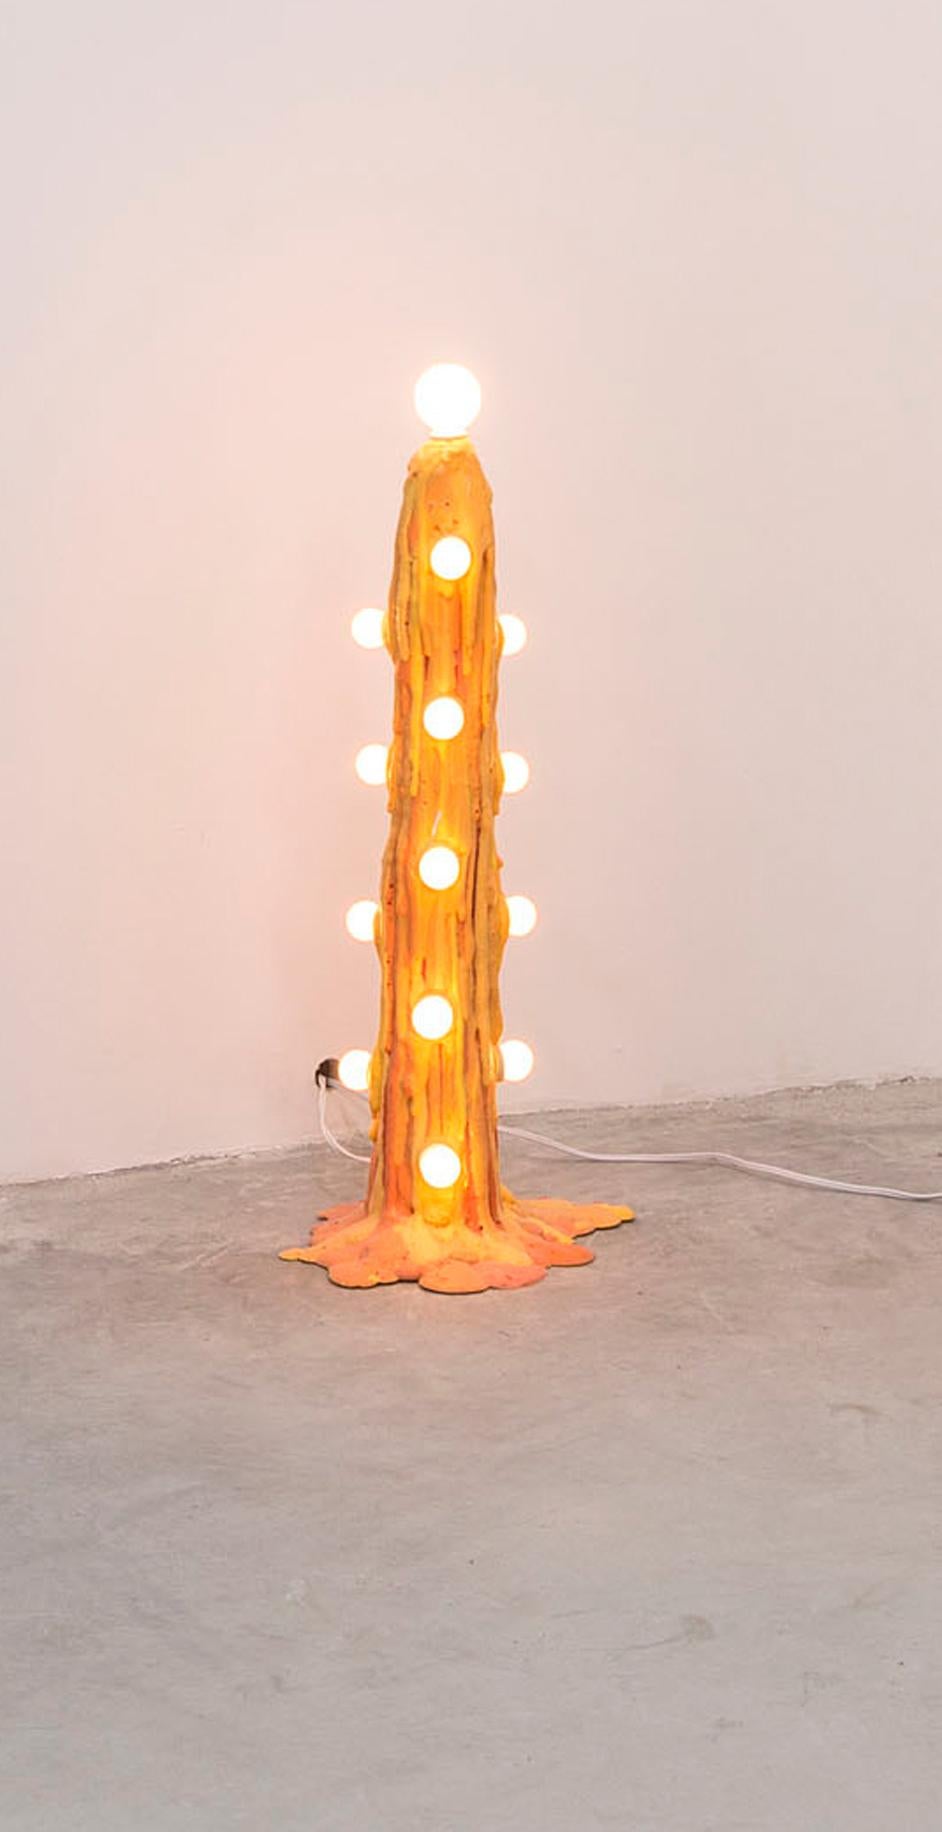 Orange Foam Light was designed by Joseph Algieri for the In Good Company show in 2017. The expandable foam houses 7.5W light bulbs and creates an abstract floor lighting.